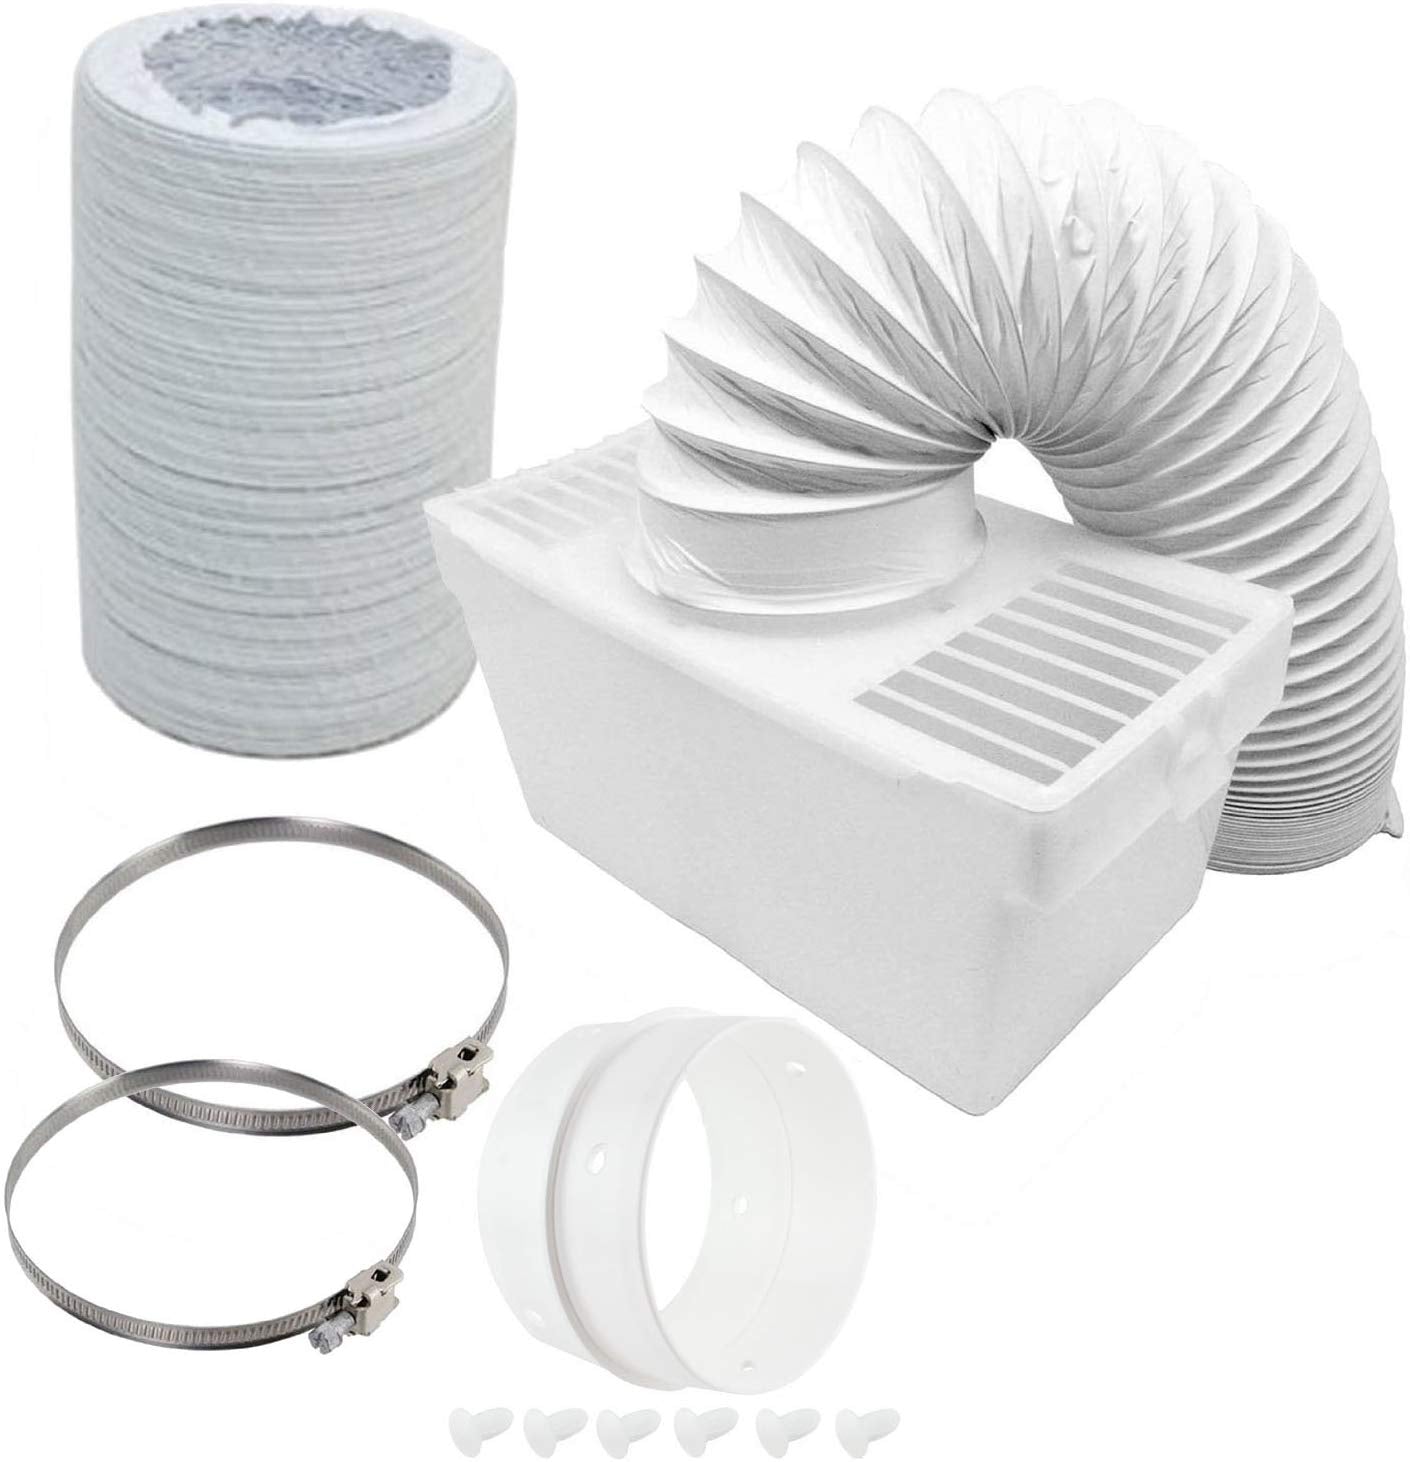 Condenser Box & Extra Long Hose Kit With Connection Ring for Miele Tumble Dryer (4" / 100mm Diameter / 6M Hose)